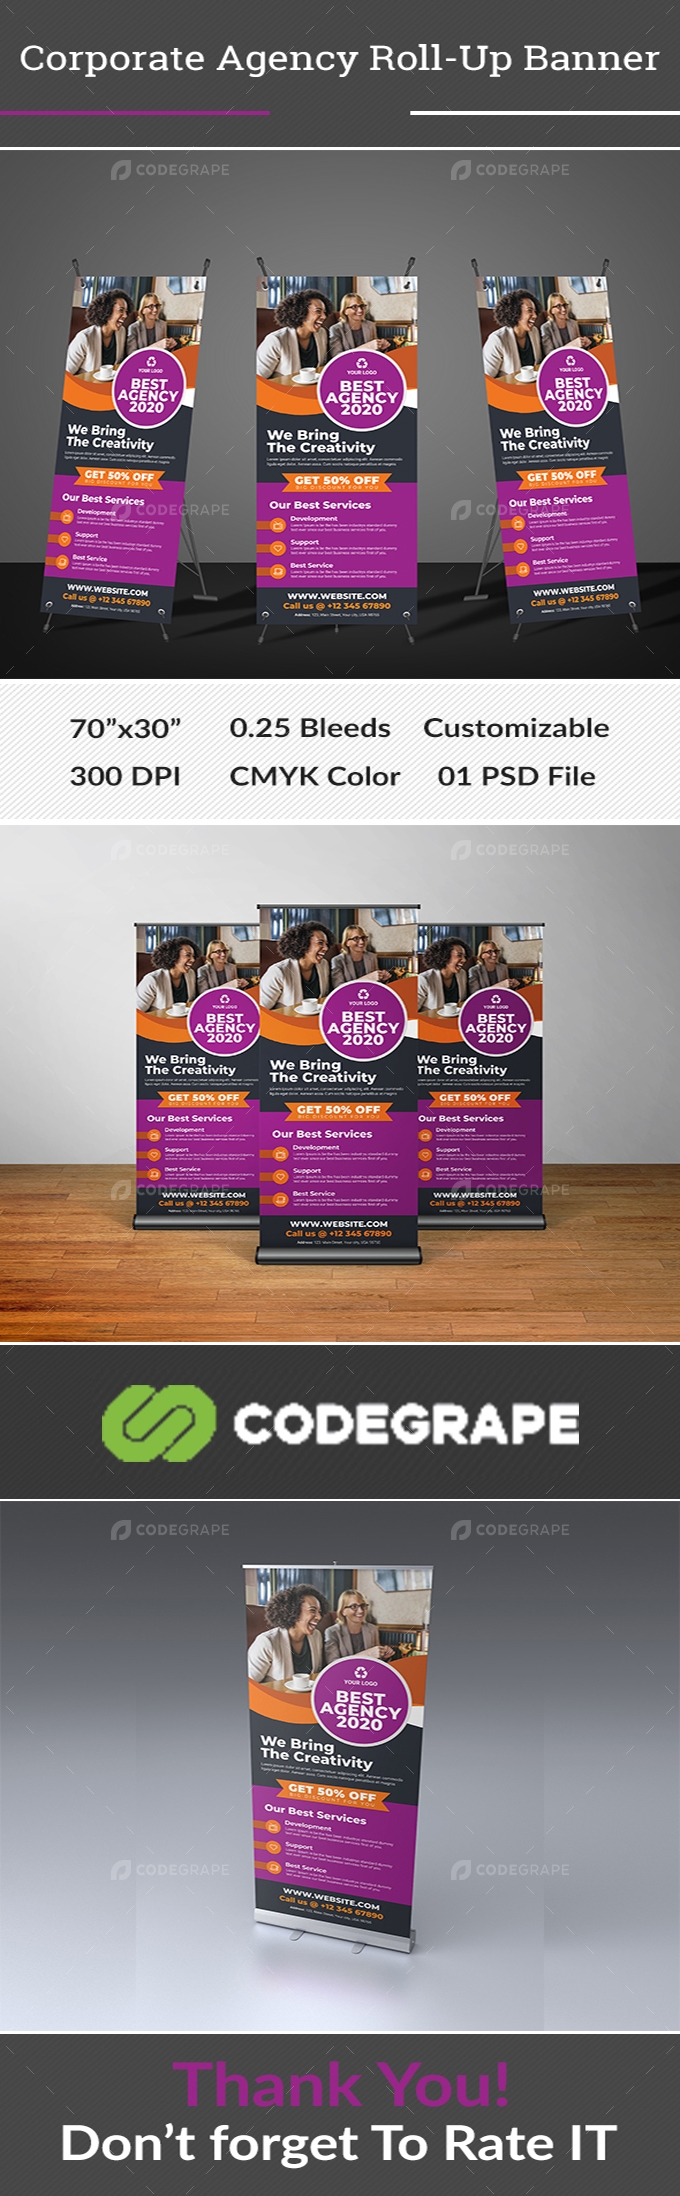 Corporate Agency Roll-Up Banner